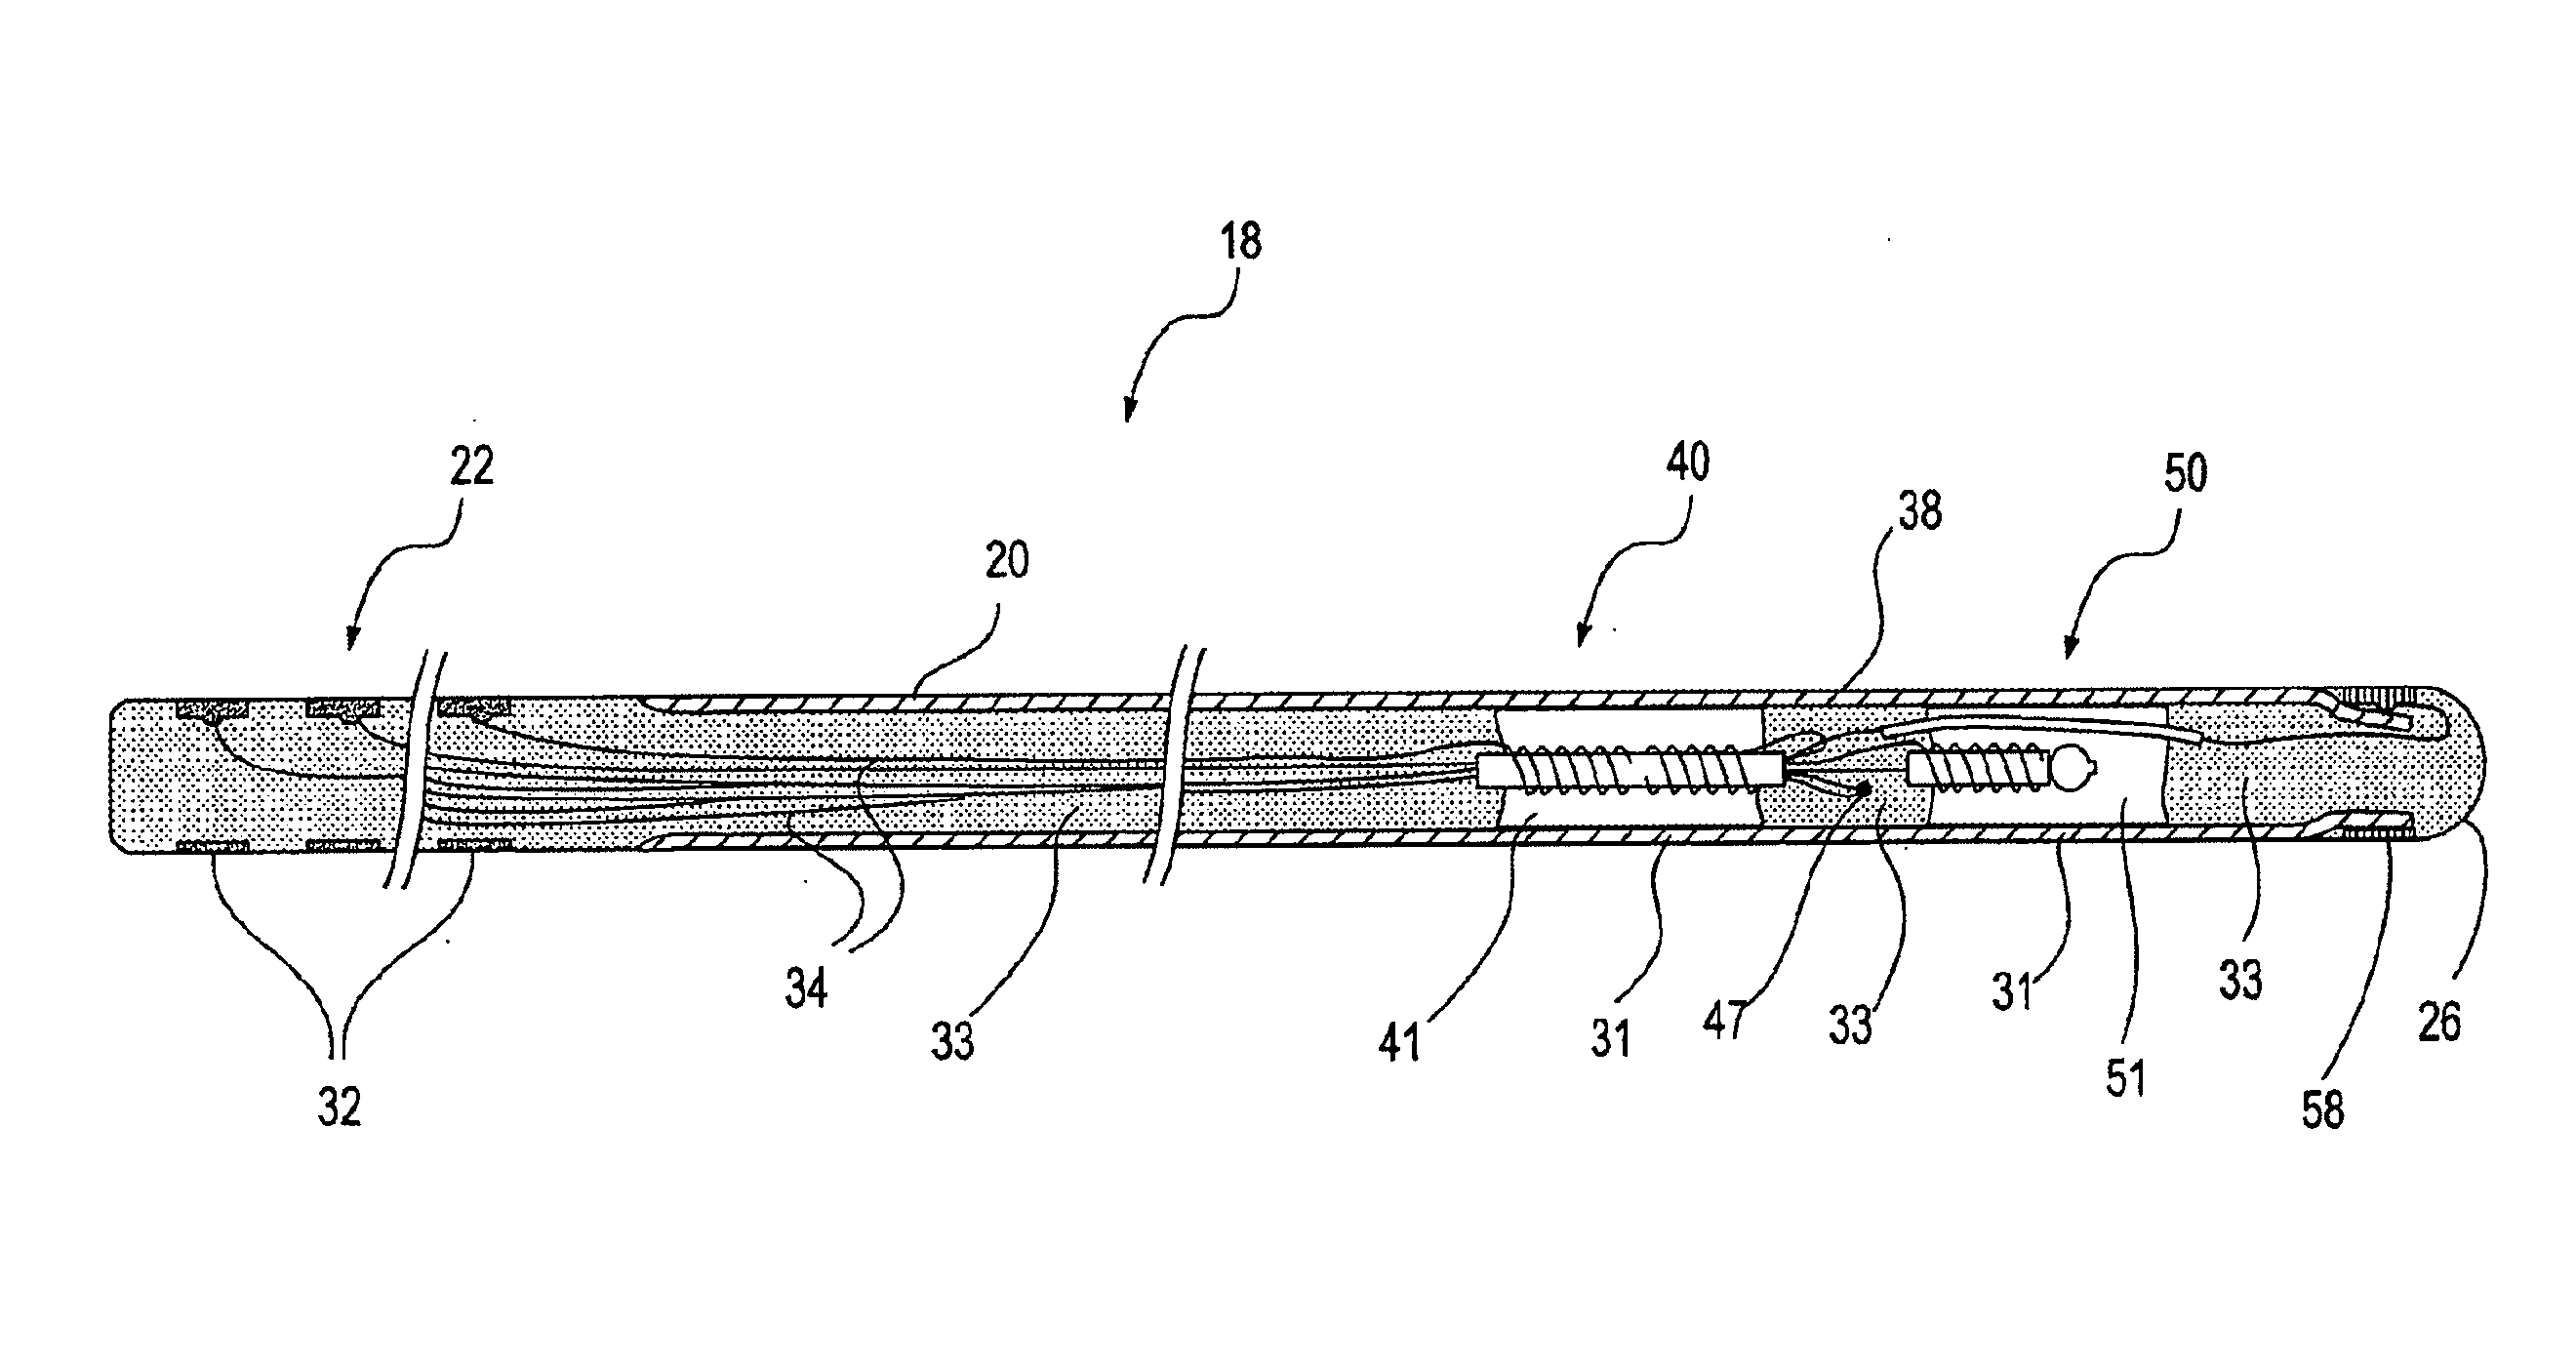 Probe with gas permeable material surrounding a gas sensor assembly